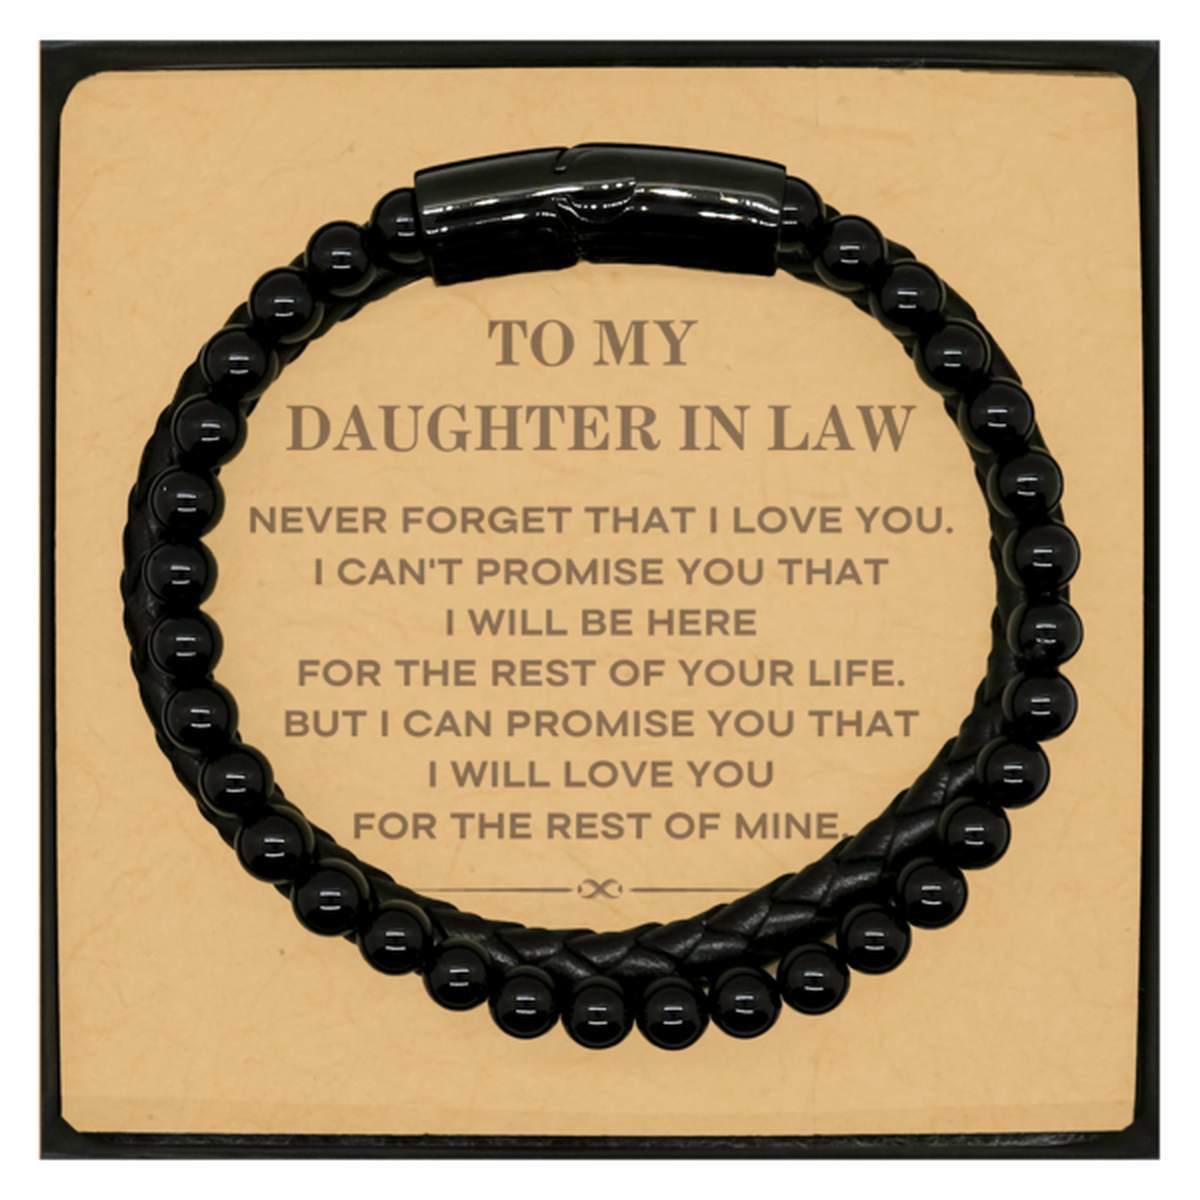 To My Daughter In Law Gifts, I will love you for the rest of mine, Love Daughter In Law Bracelet, Birthday Christmas Unique Stone Leather Bracelets For Daughter In Law